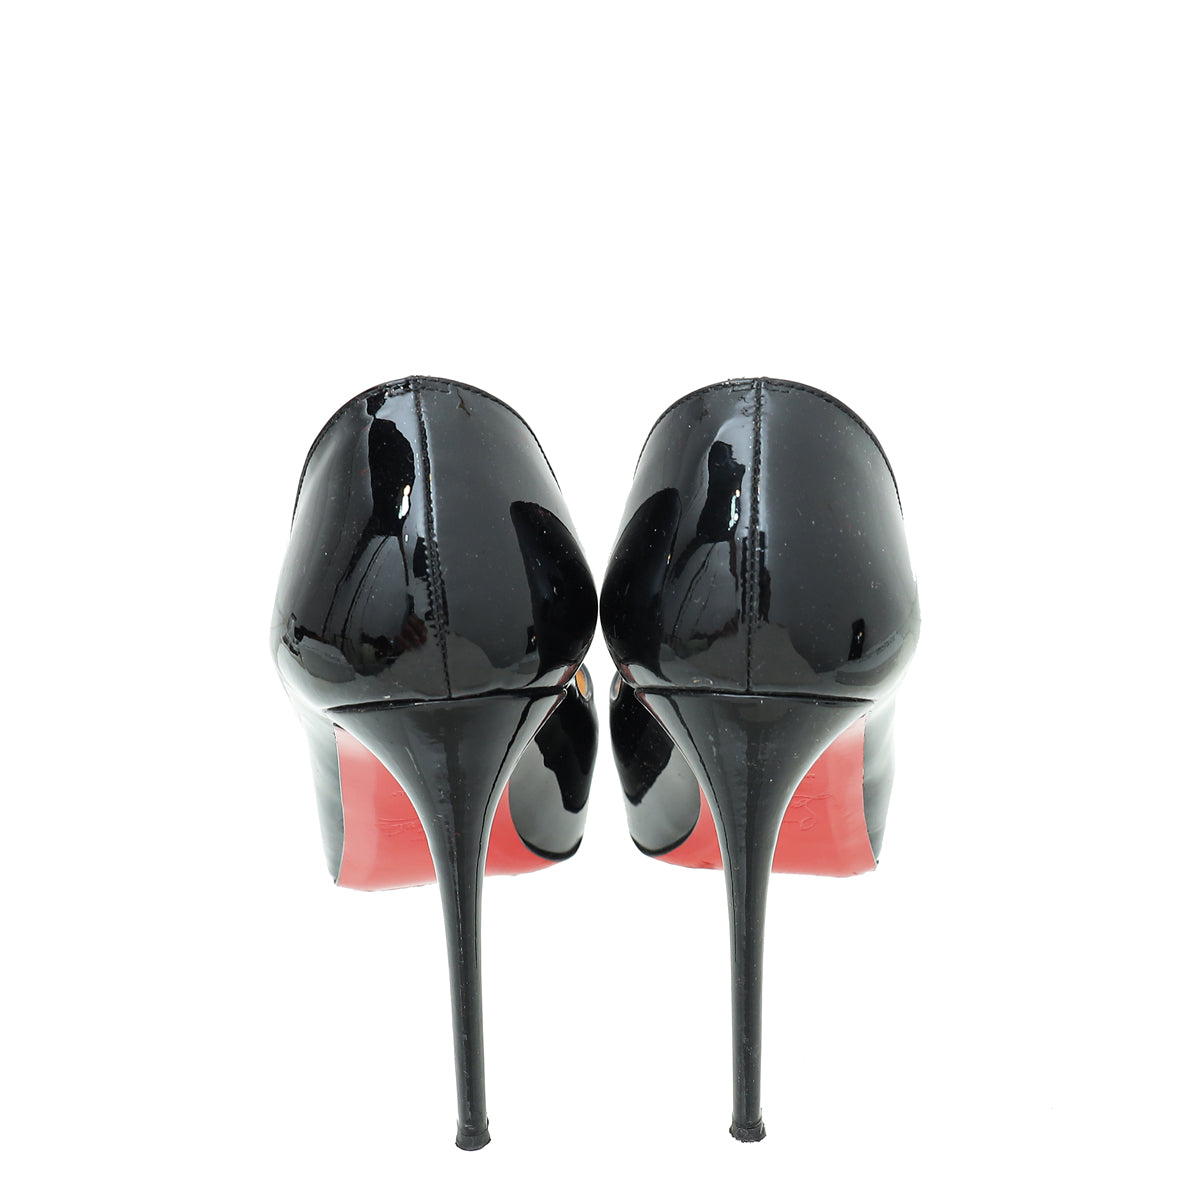 Christian Louboutin Bicolor New Very Prive 120 Pumps 36.5